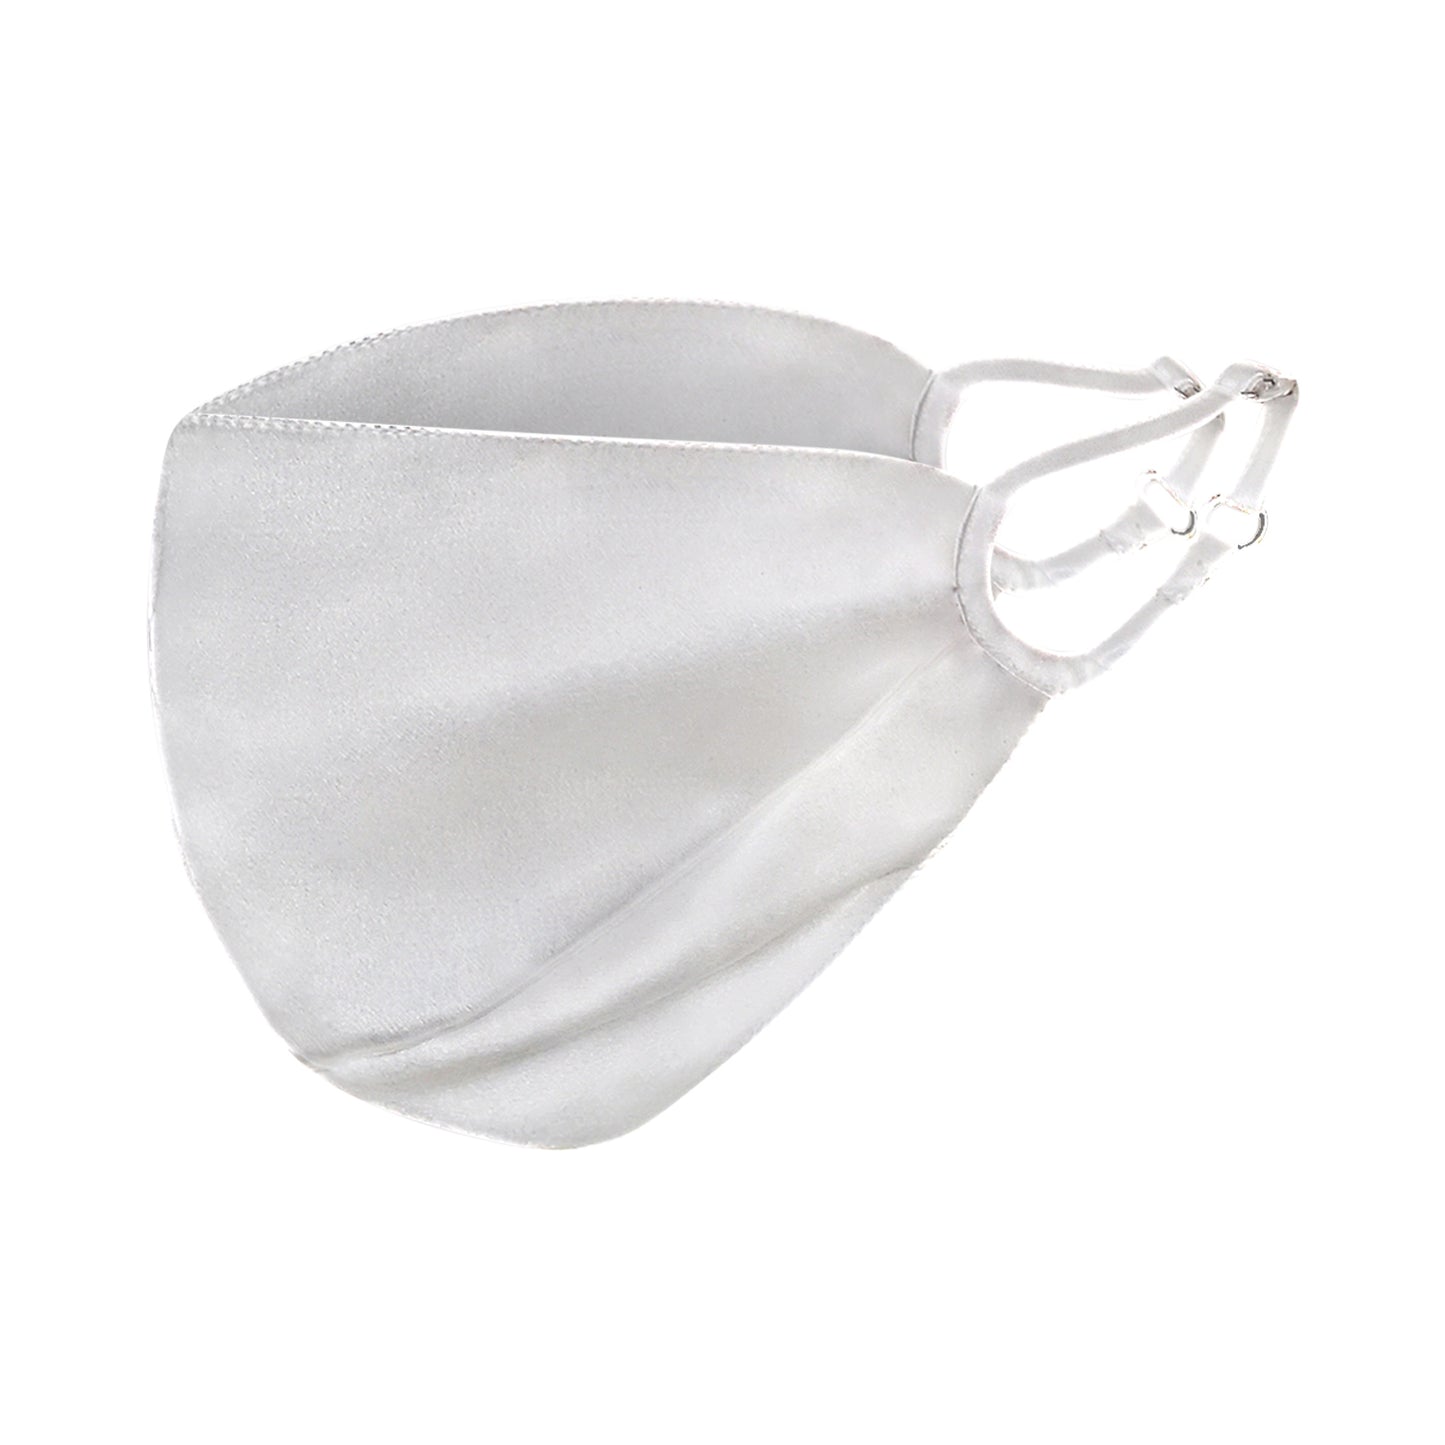 Triple Layer Adjustable 100% Silk Face Mask w/ Filter Pocket & Nose Wire